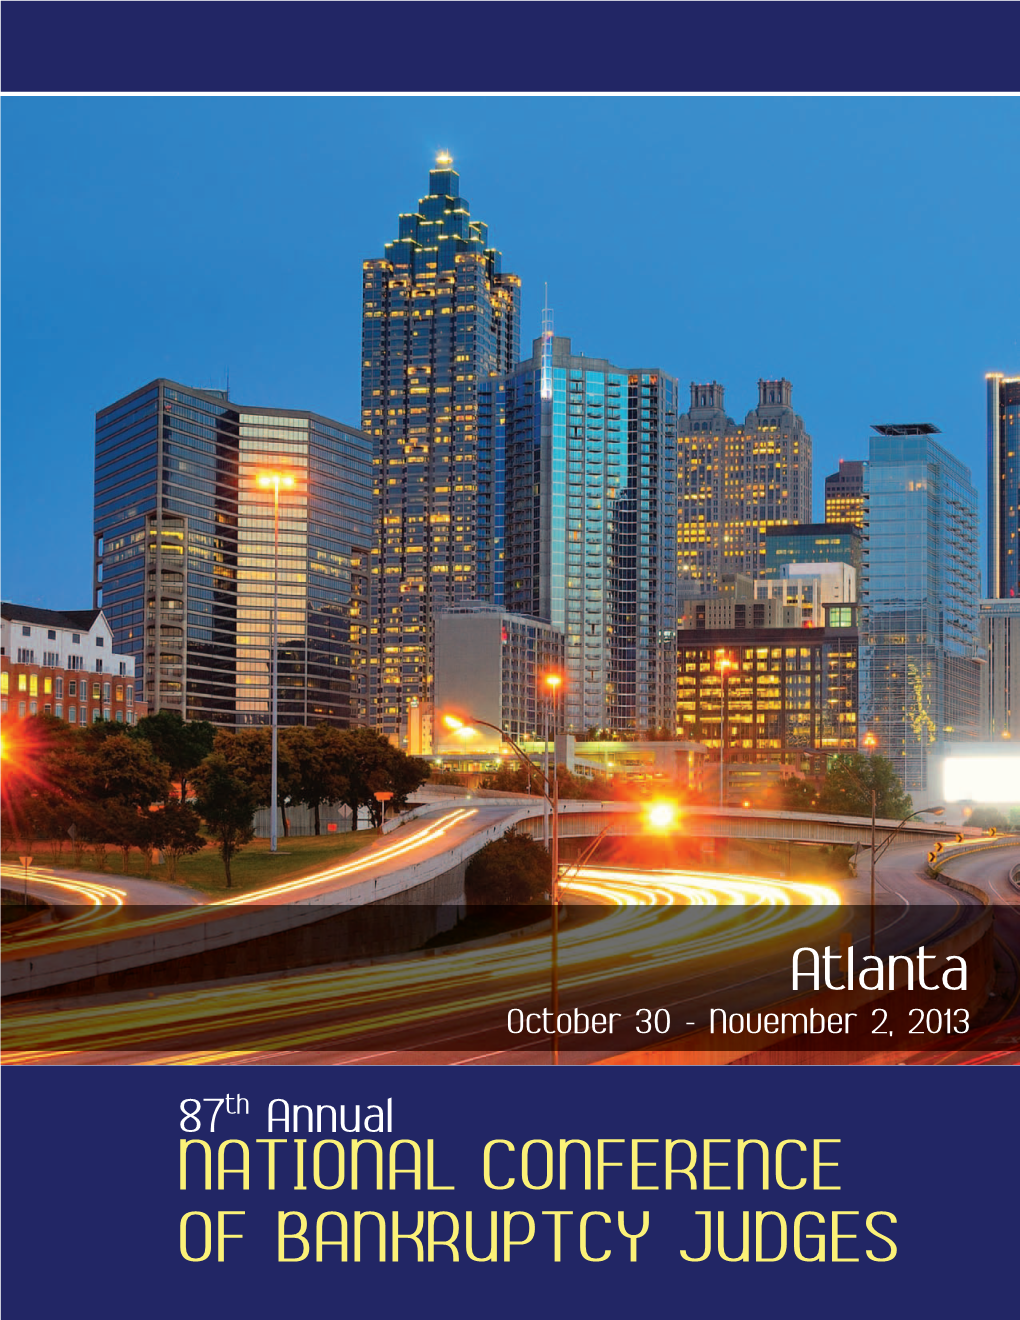 Atlanta October 30 - November 2, 2013 87Th Annual NATIONAL CONFERENCE of BANKRUPTCY JUDGES PRESIDENT’S WELCOME